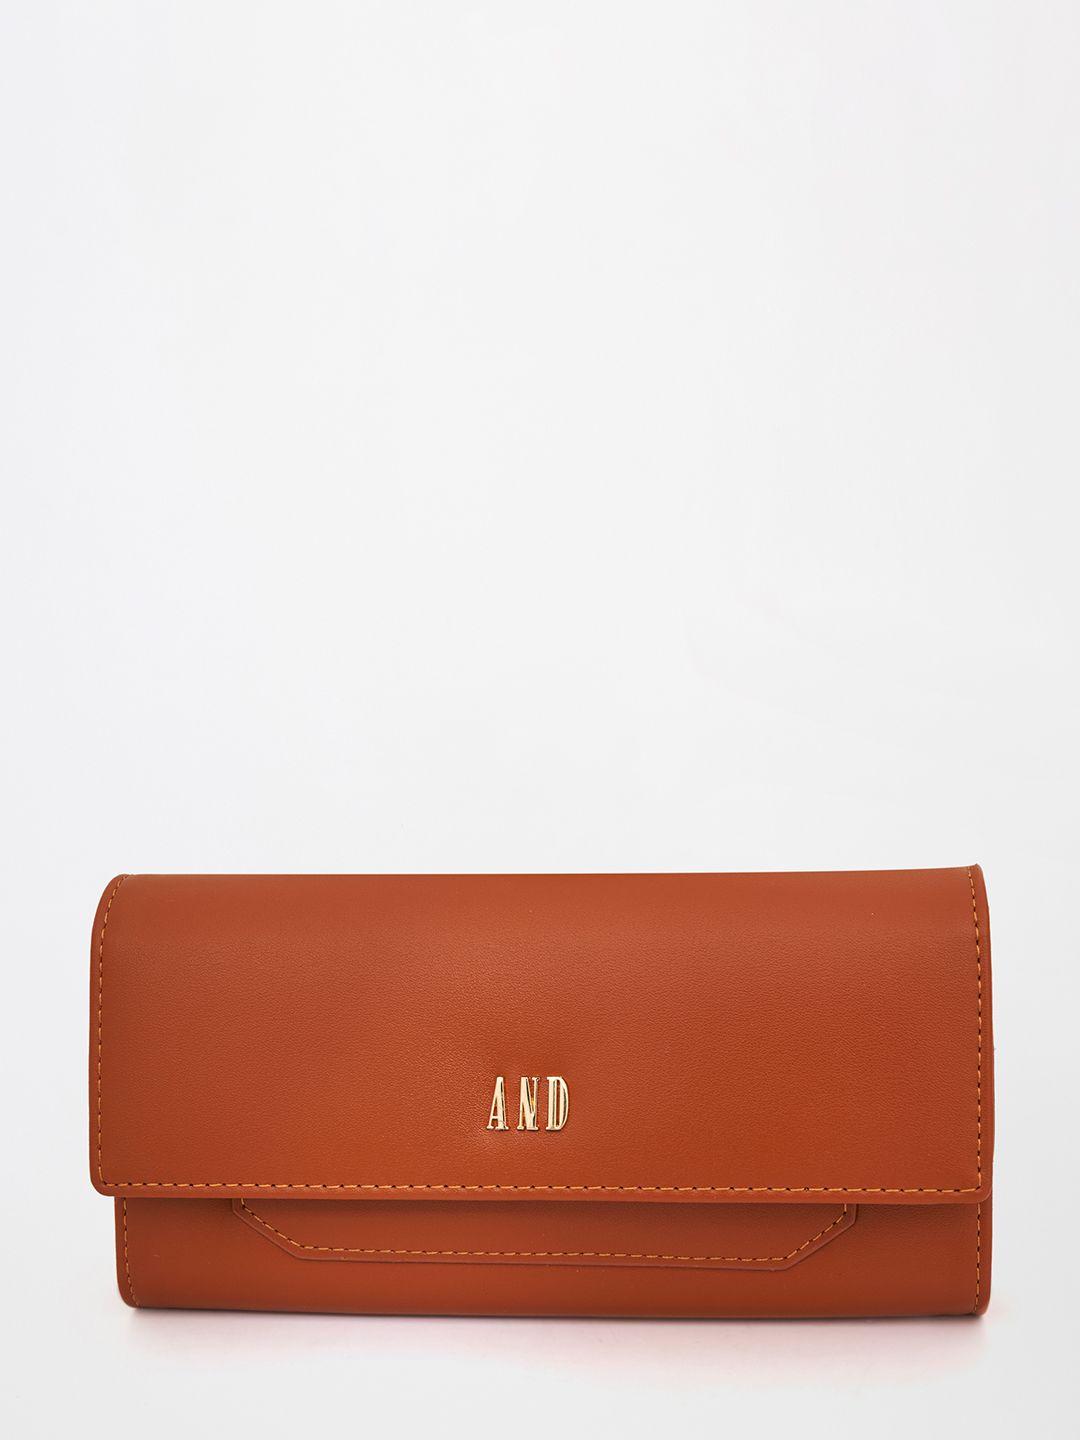 and tan envelope clutch